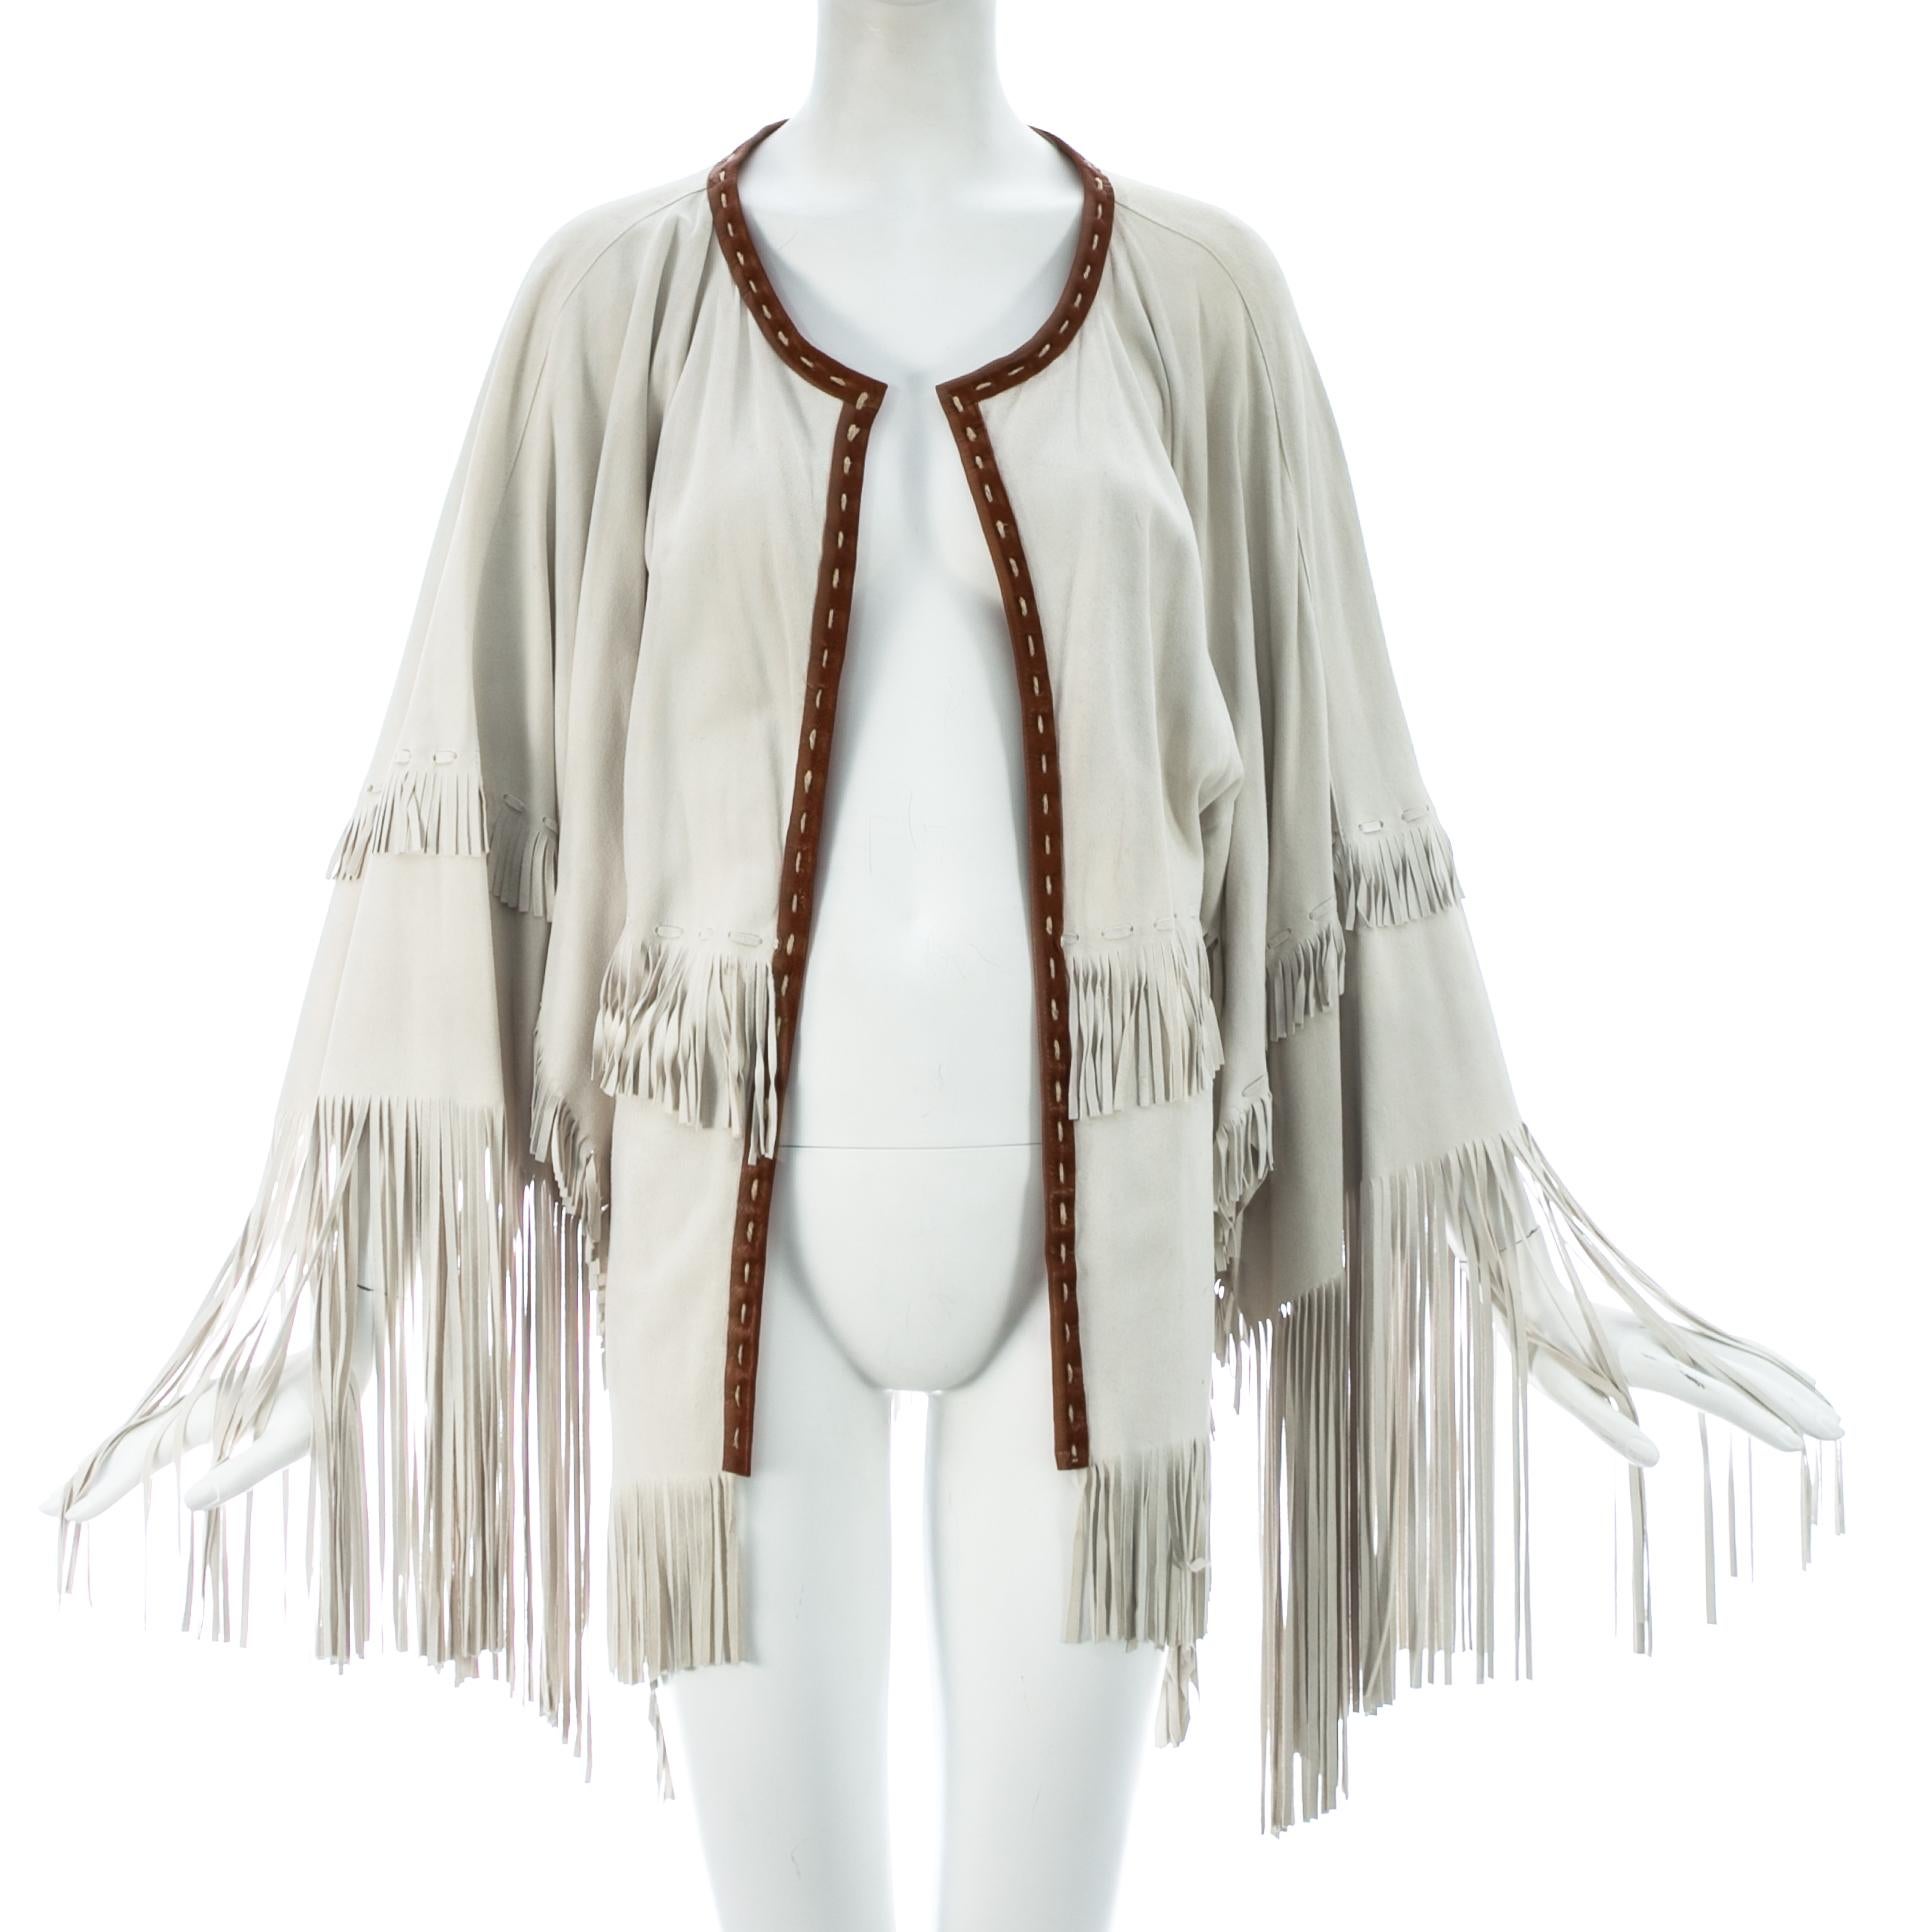 Dolce & Gabbana cream suede fringed poncho jacket with tan leather trim

Spring-Summer 2004